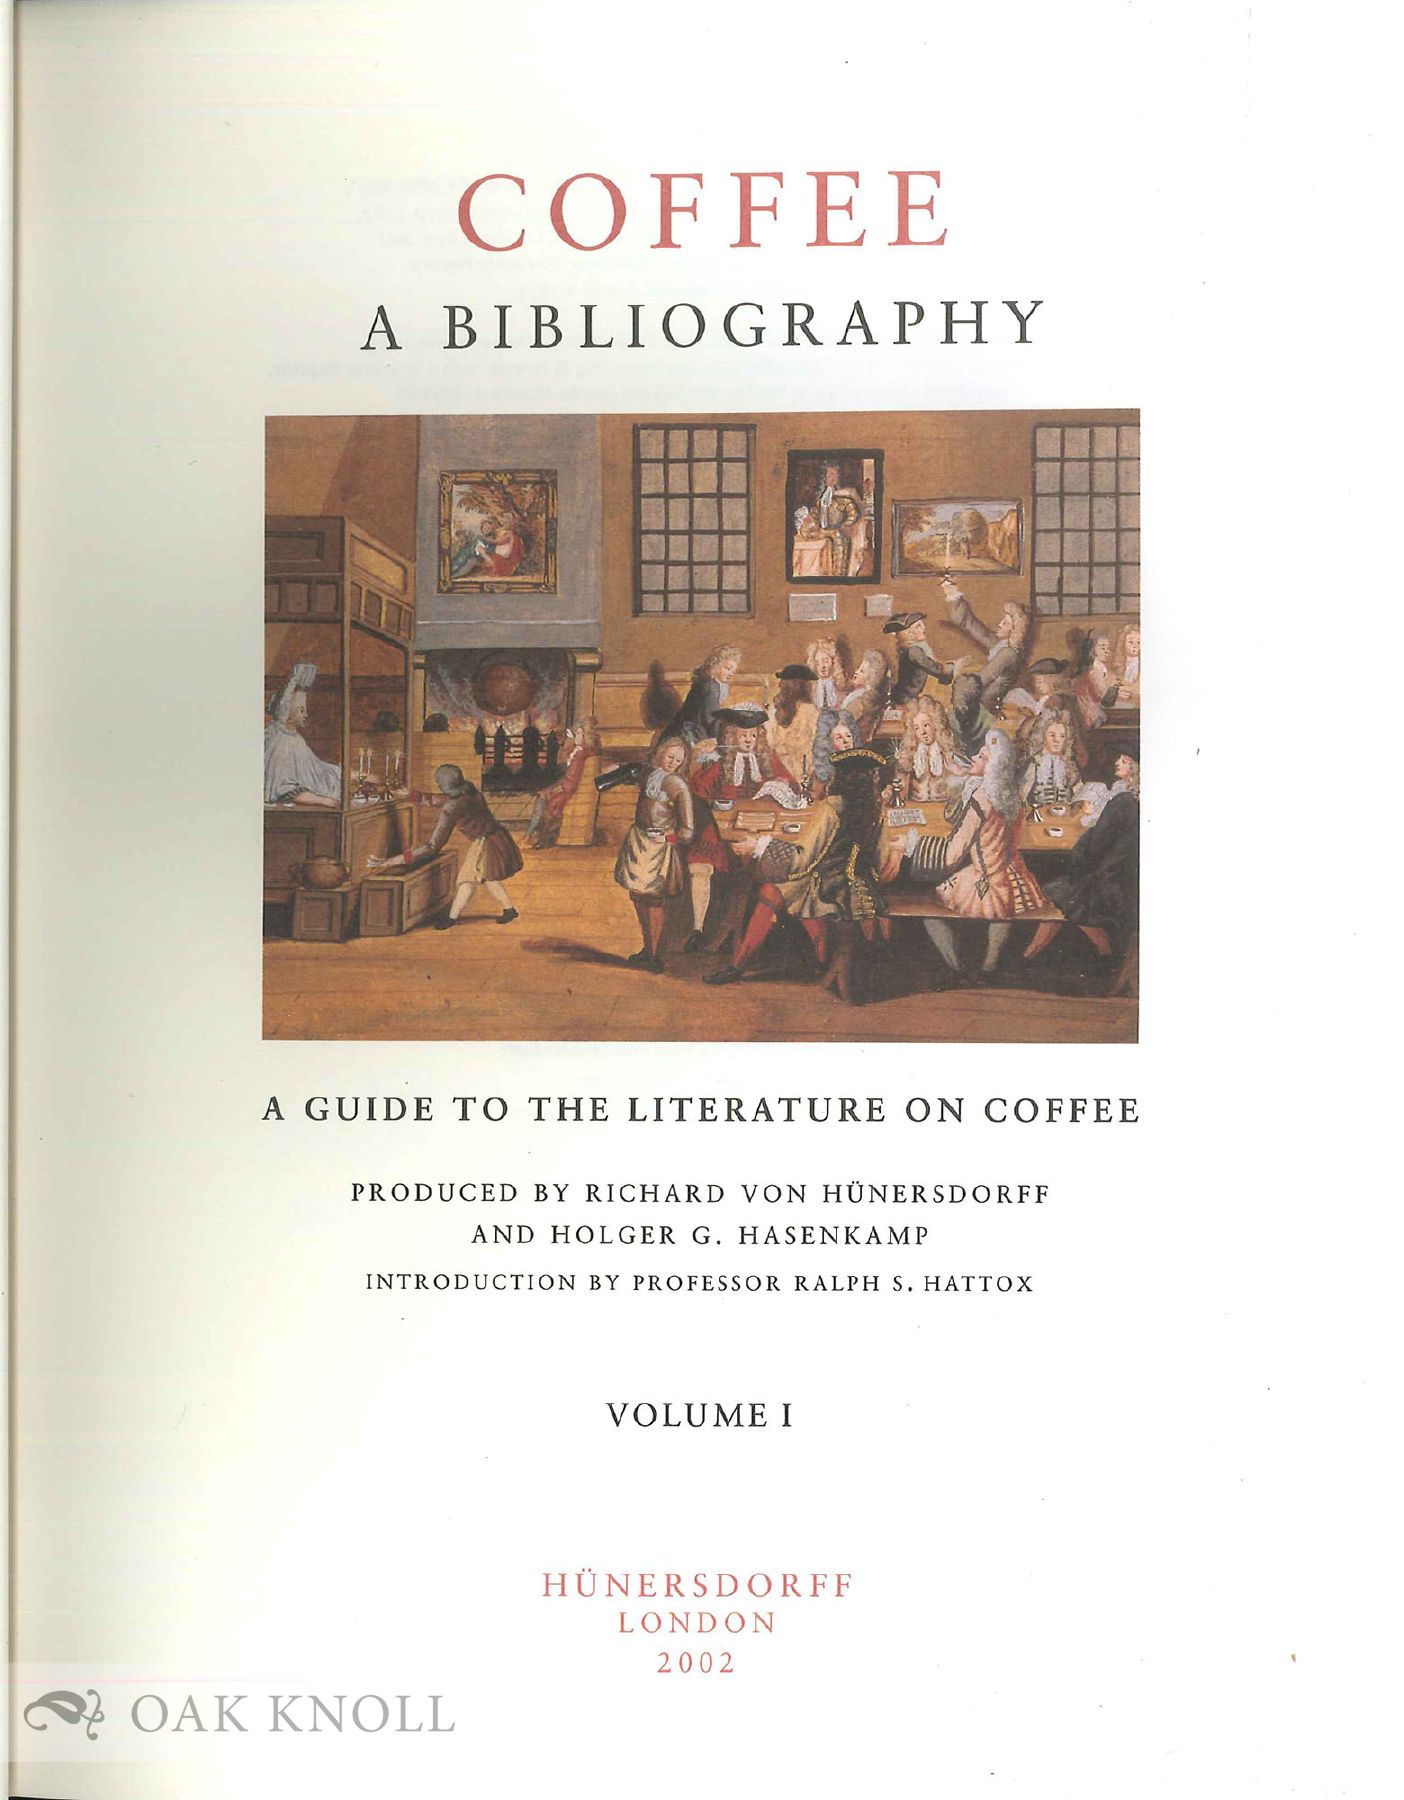 COFFEE: A BIBLIOGRAPHY, A GUIDE TO THE